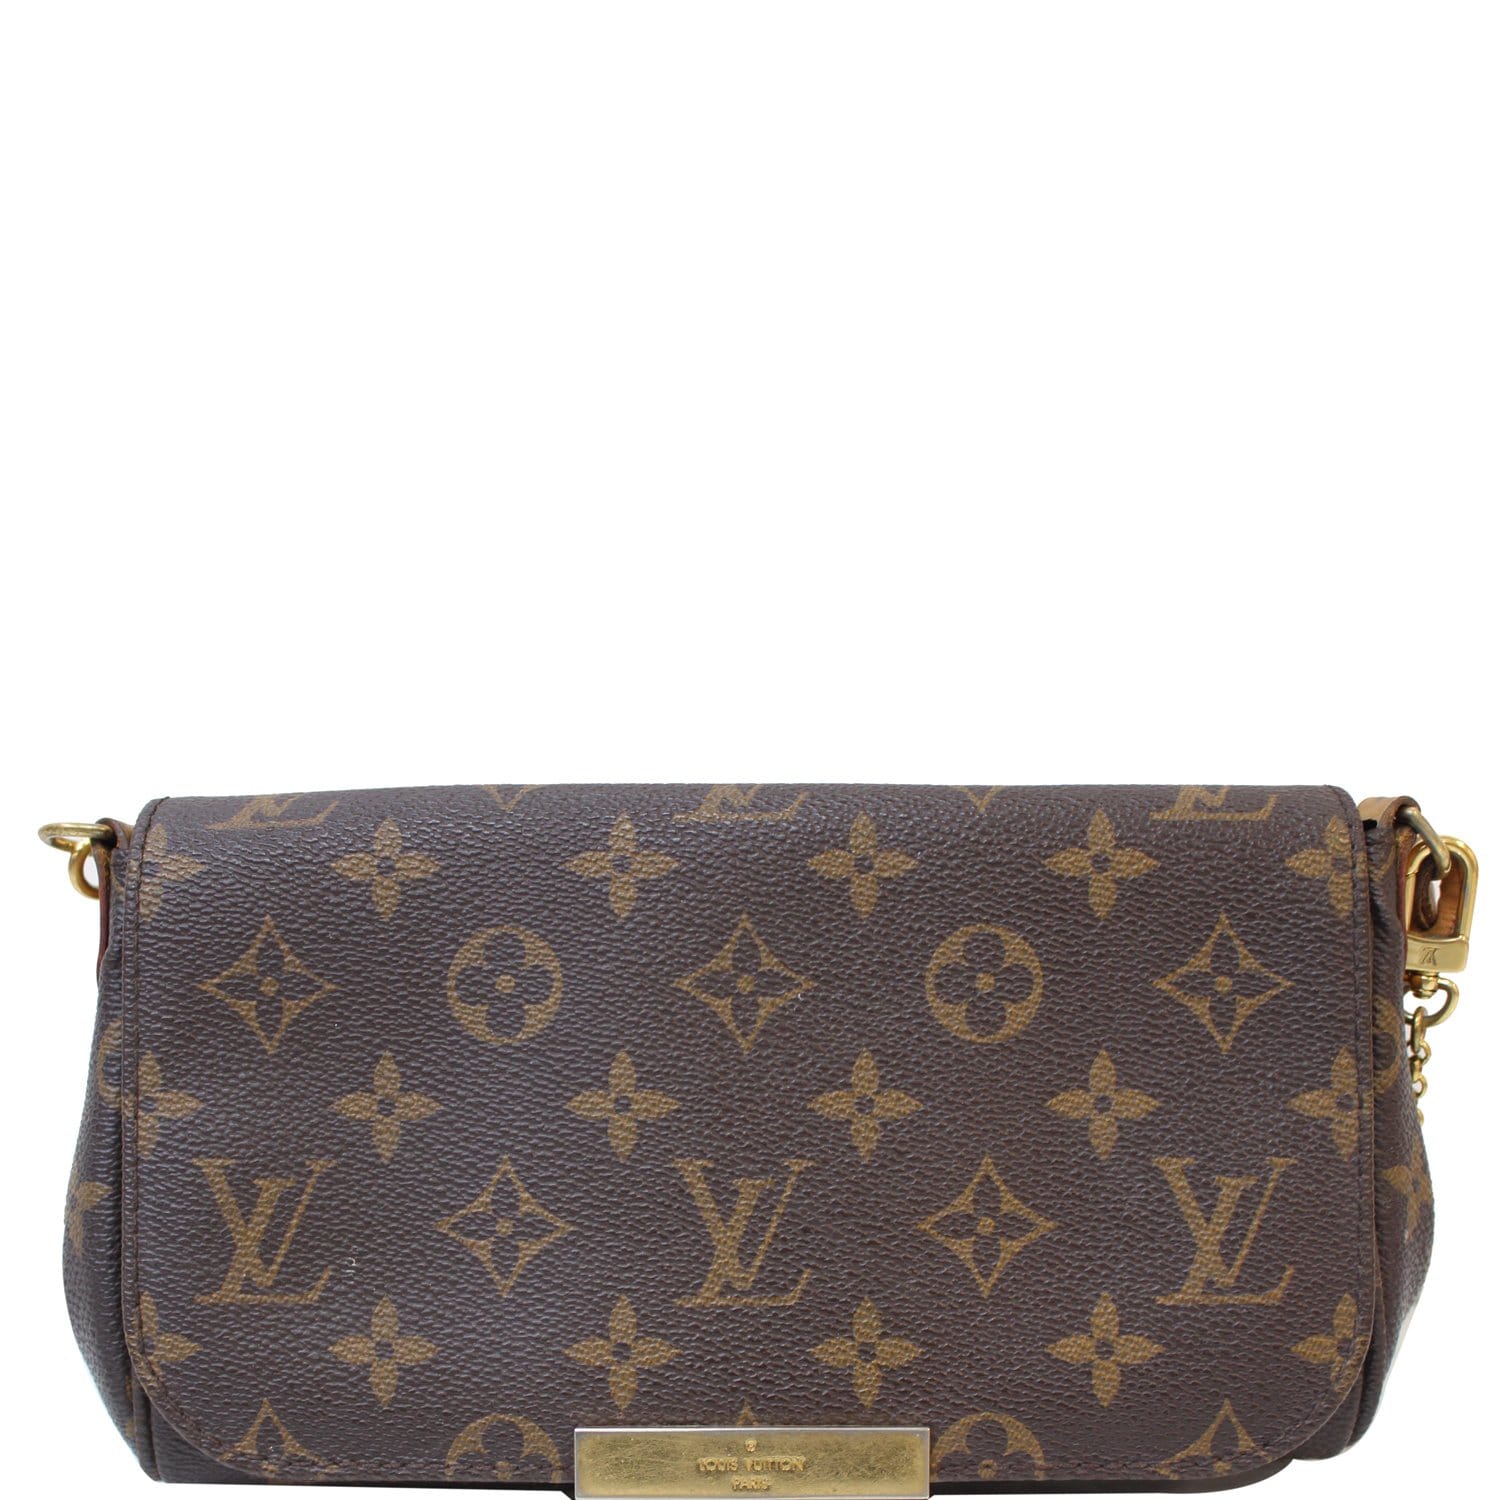 Louis+Vuitton+Weekend+Tote+PM+Brown+Canvas for sale online